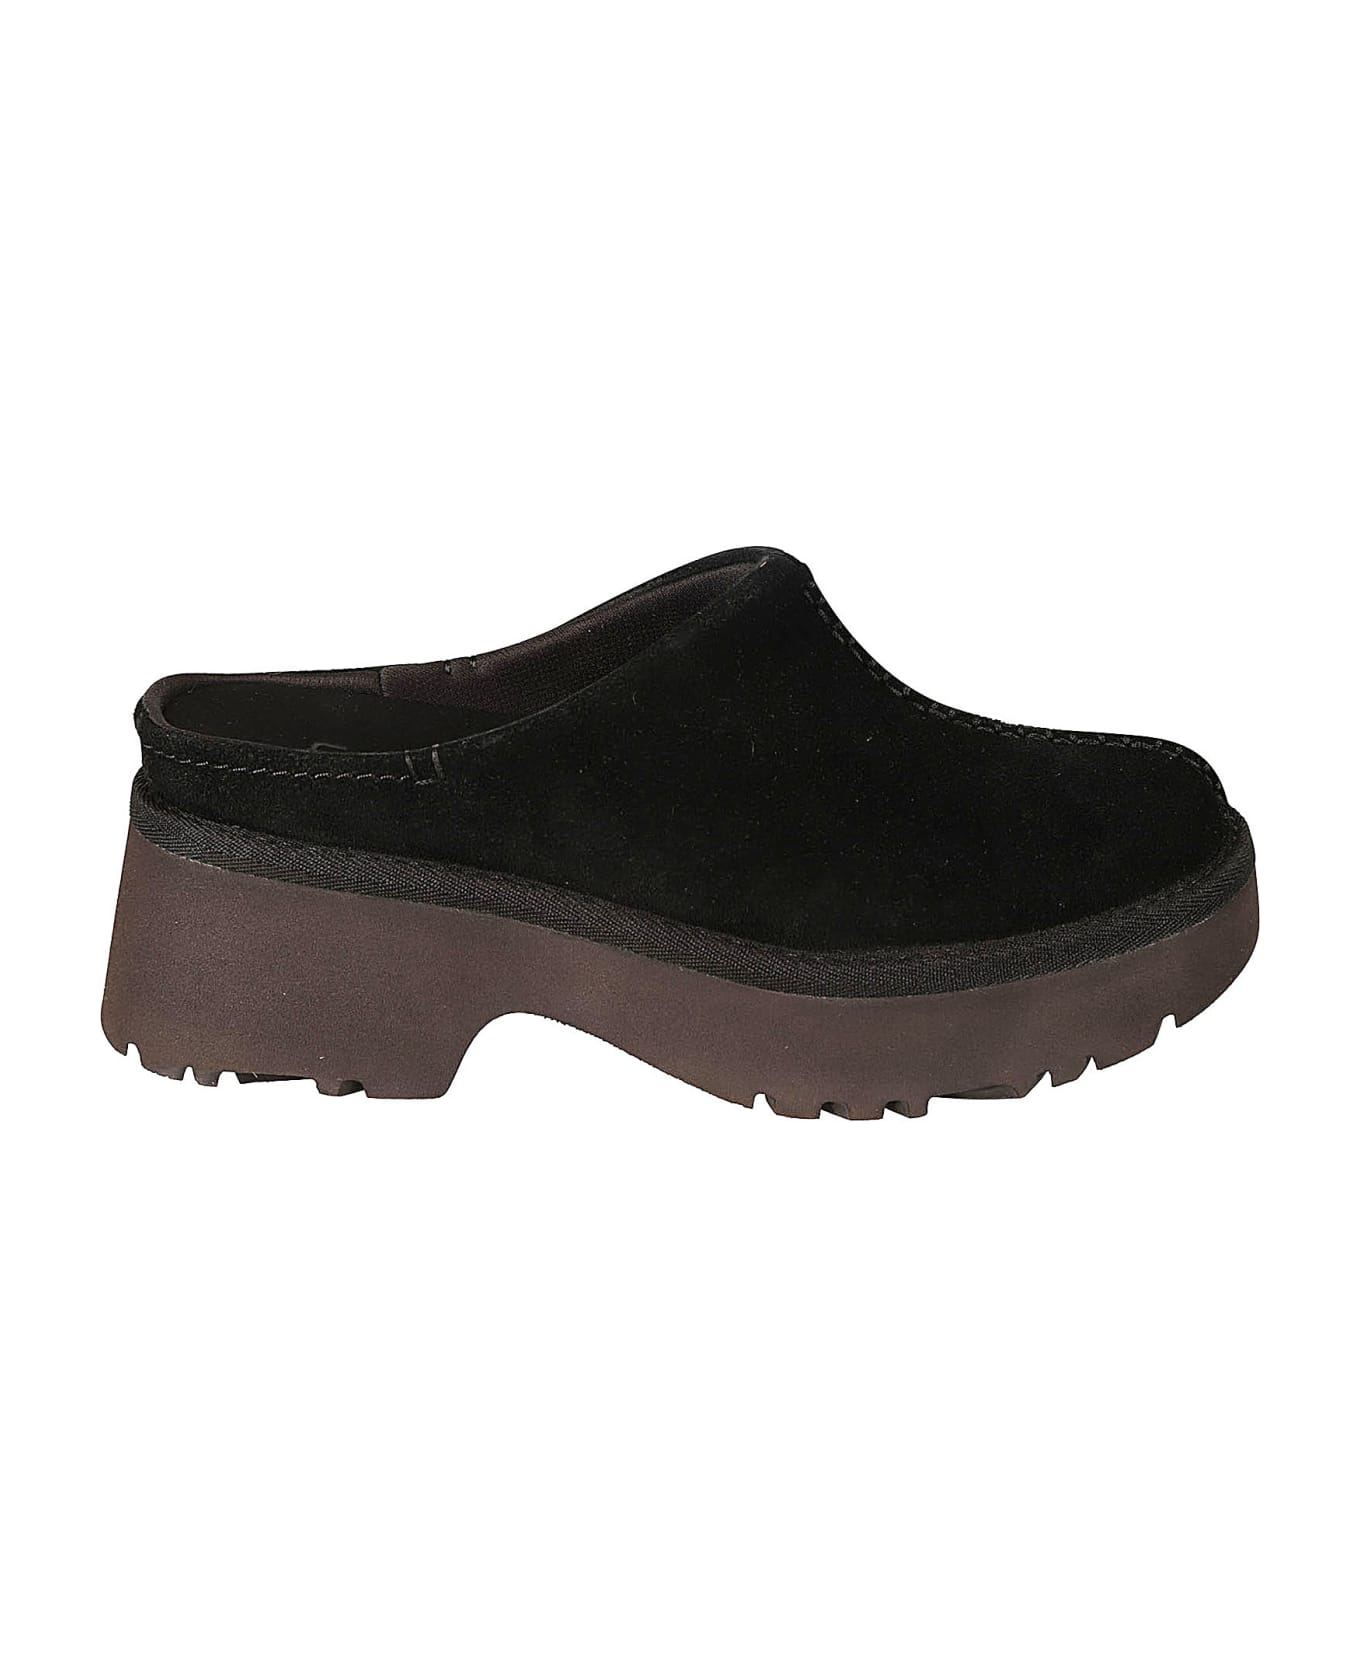 UGG New Heights Clogs - Black